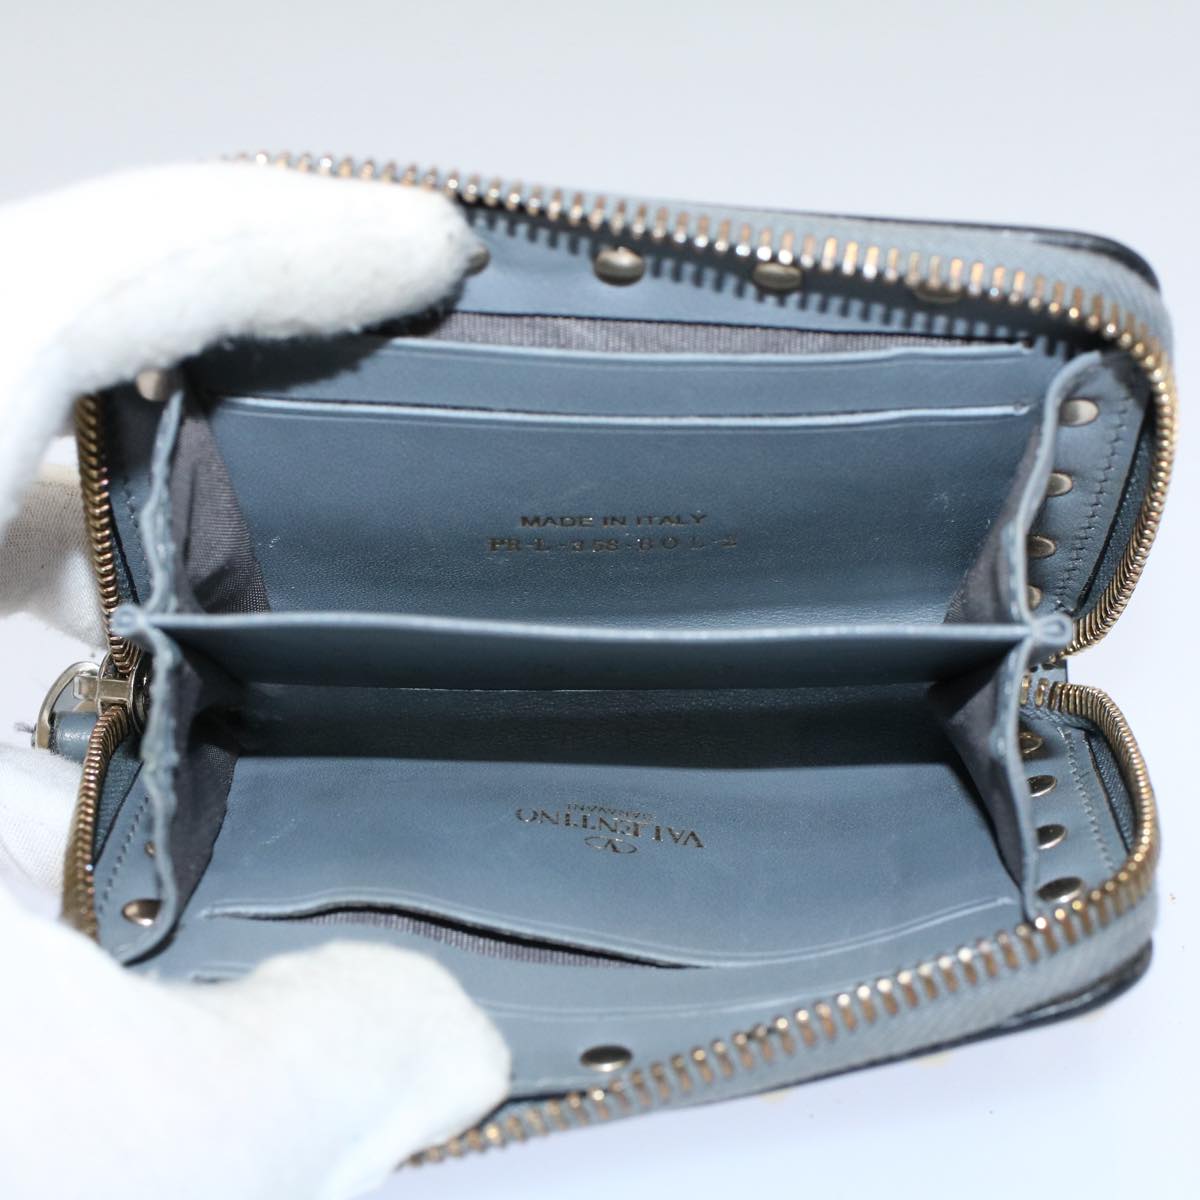 VALENTINO Wallet Leather 2Set Gray Navy Auth bs8804